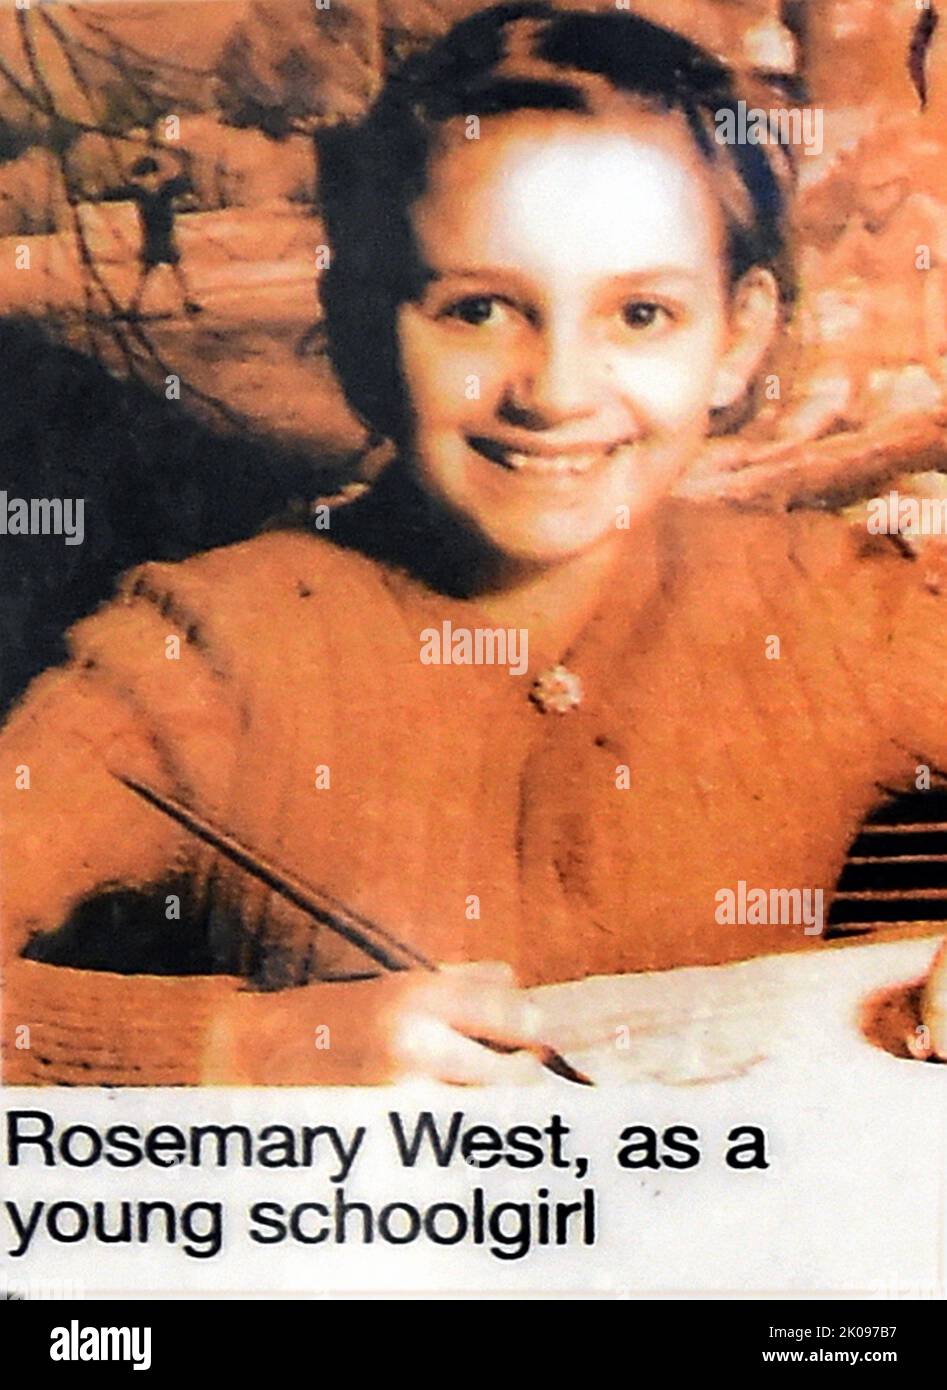 Rosemary Pauline West (nee Letts; born 29 November 1953) is an English serial killer who collaborated with her husband, Fred West in the torture and murder of at least nine young women between 1973 and 1987. She also murdered her eight-year-old stepdaughter Charmaine in 1971. The majority of these murders took place at the West residence in Gloucester. Rose is an inmate at HM Prison New Hall, Flockton, West Yorkshire, after being convicted in 1995 of ten murders. Stock Photo